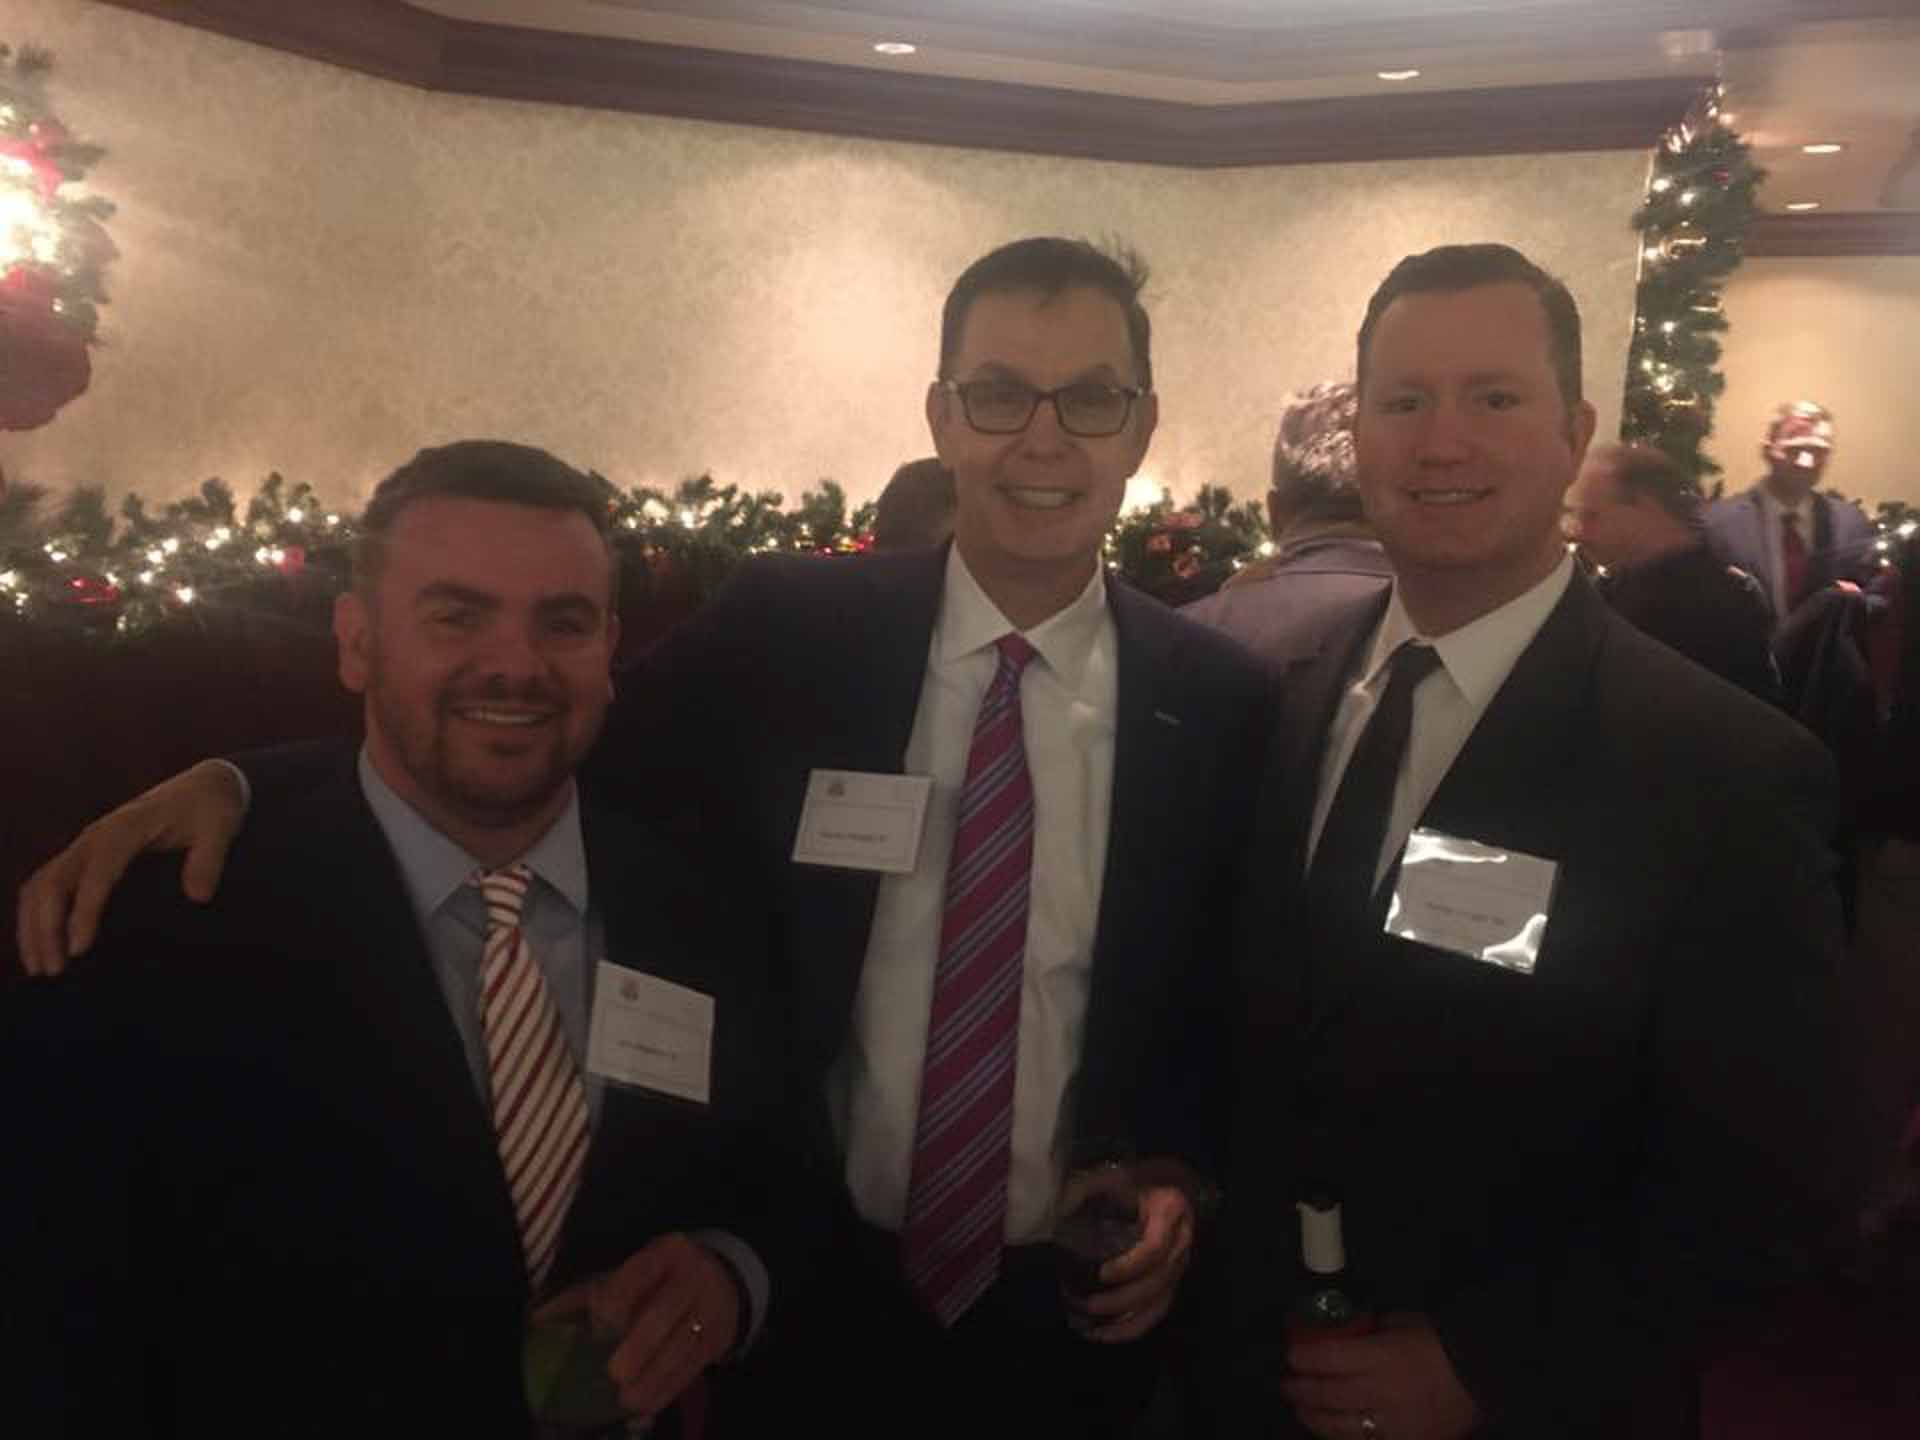 law-association-christmas-social-2019-three-people-smile-at-event